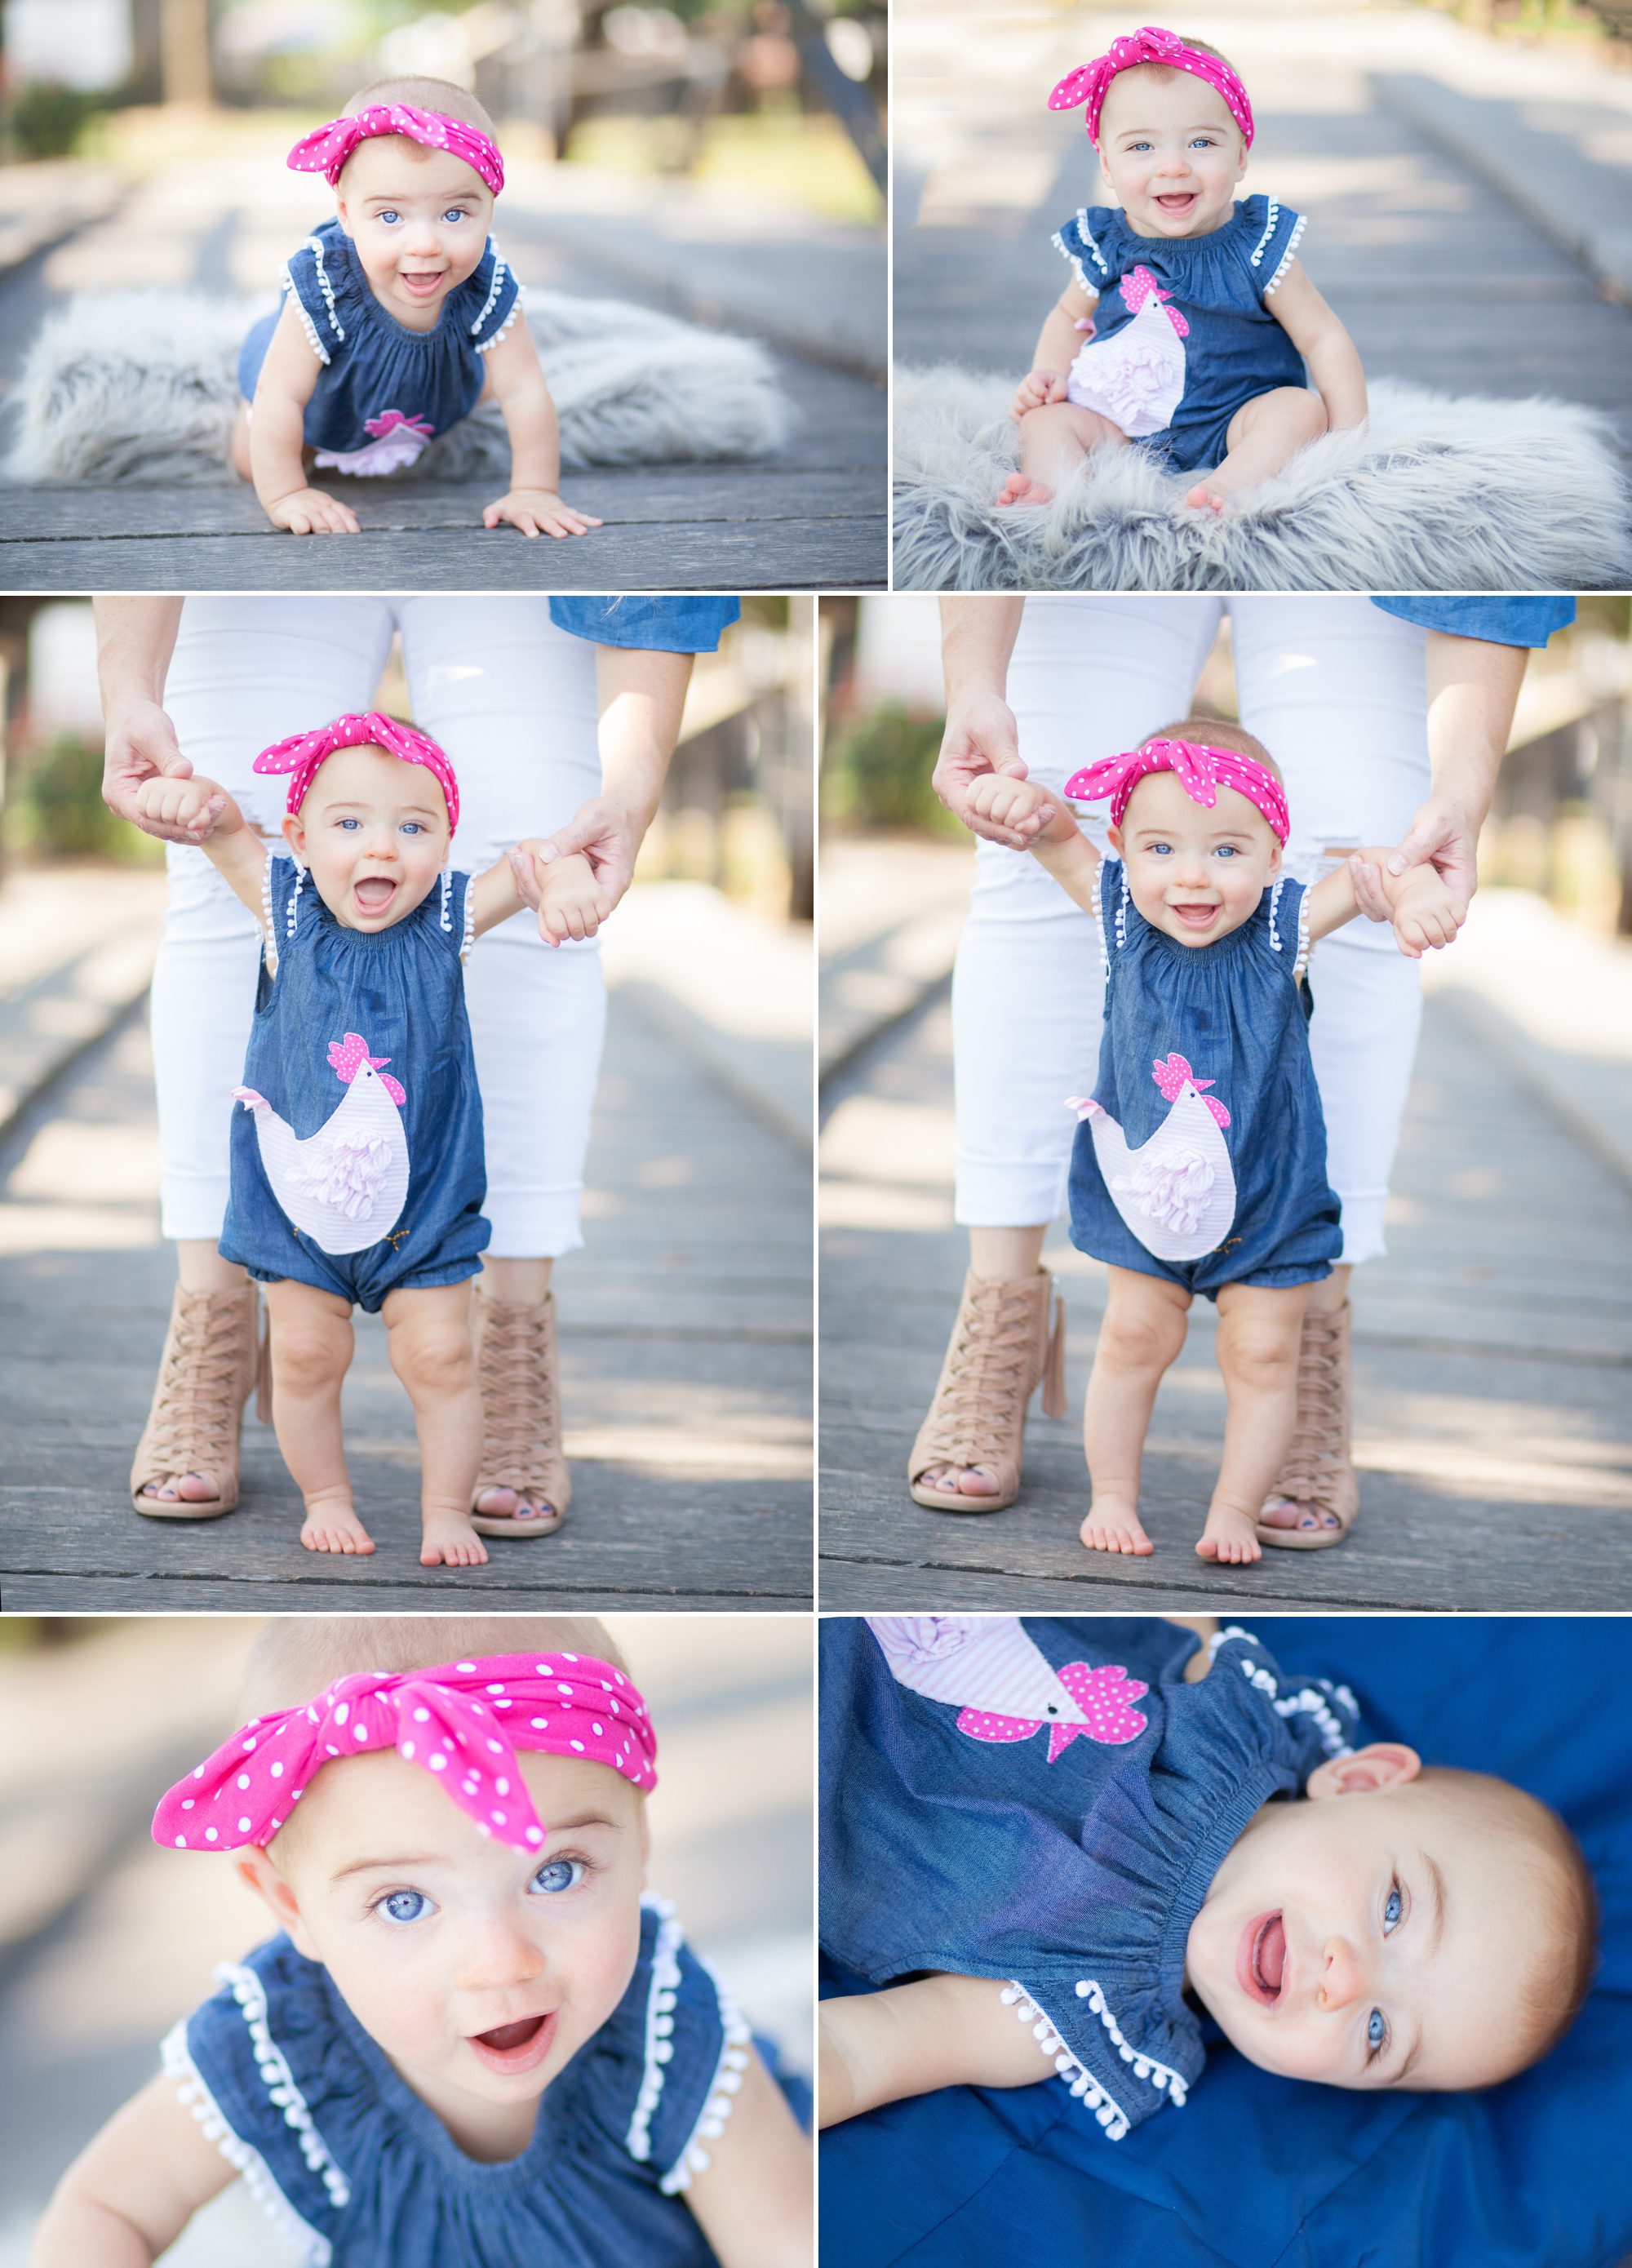 6 month old Collins at her photography shoot in Murfreesboro TN at Cannonsburgh, photo by Krista Lee Photography